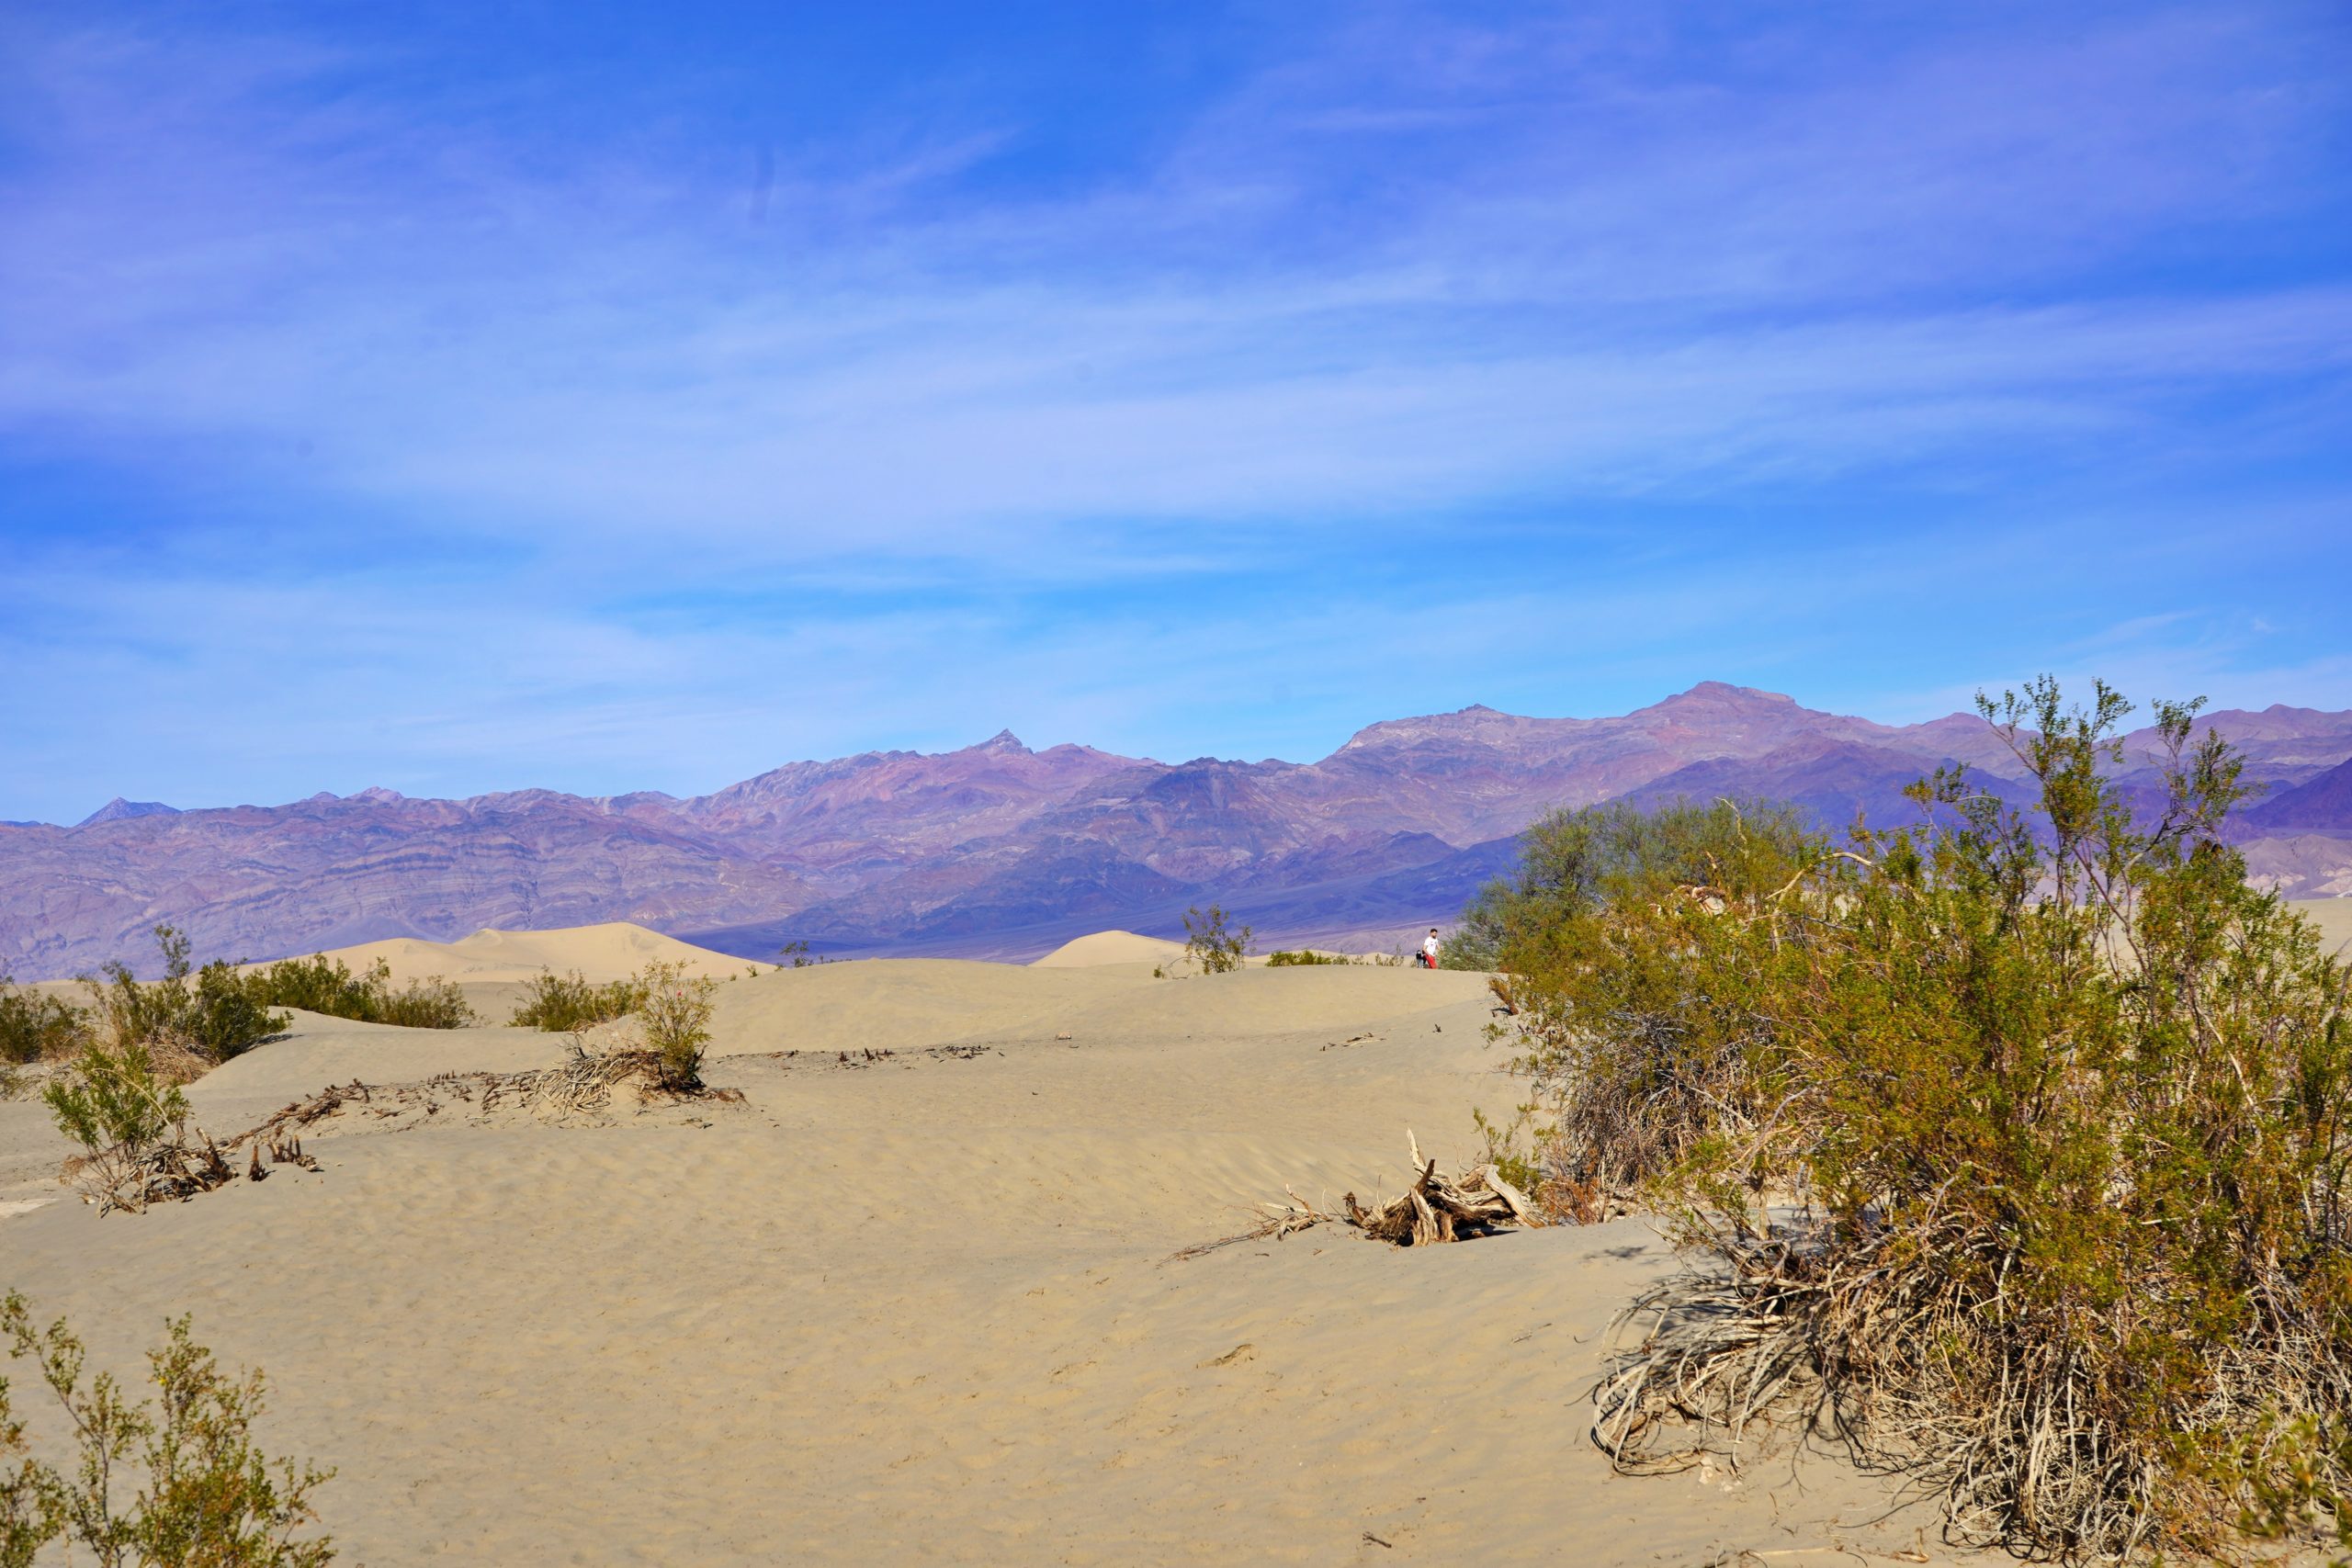 The epic sand dunes of Death Valley | Travel Beauty